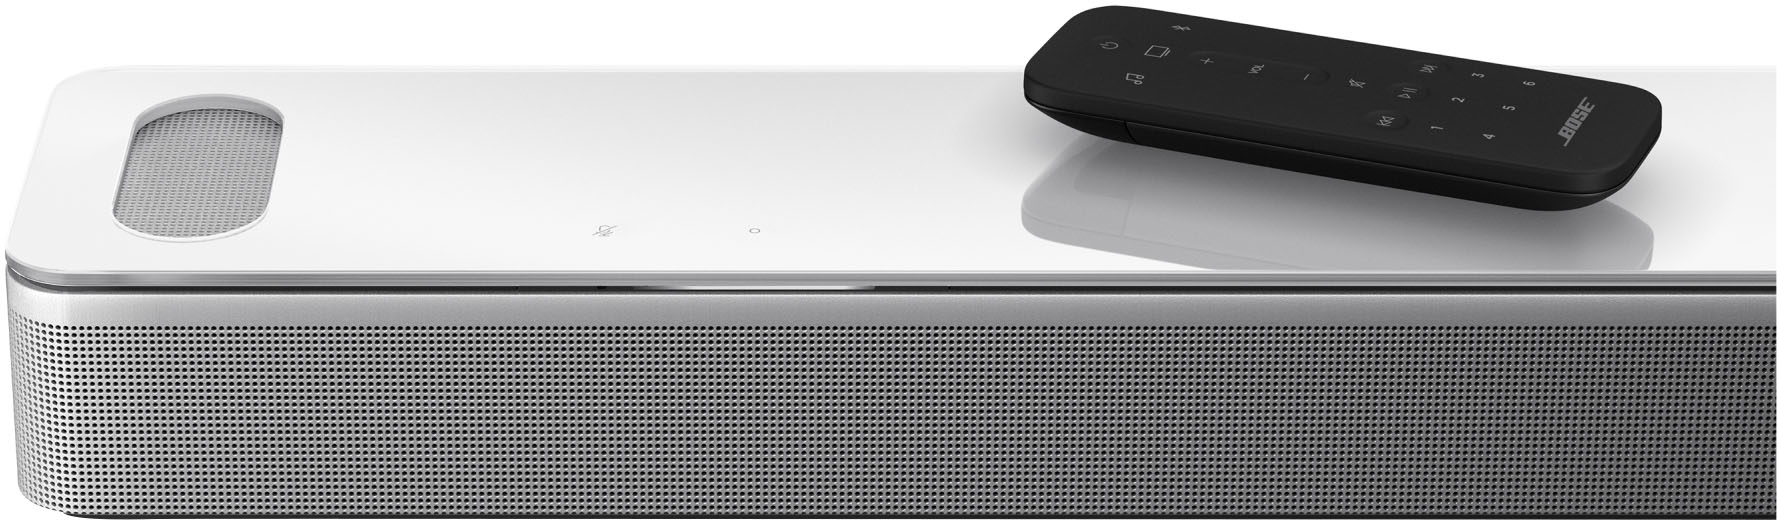 Bose Smart Ultra Soundbar Buy with Dolby Arctic Best Atmos White - Assistant and Voice 882963-1200